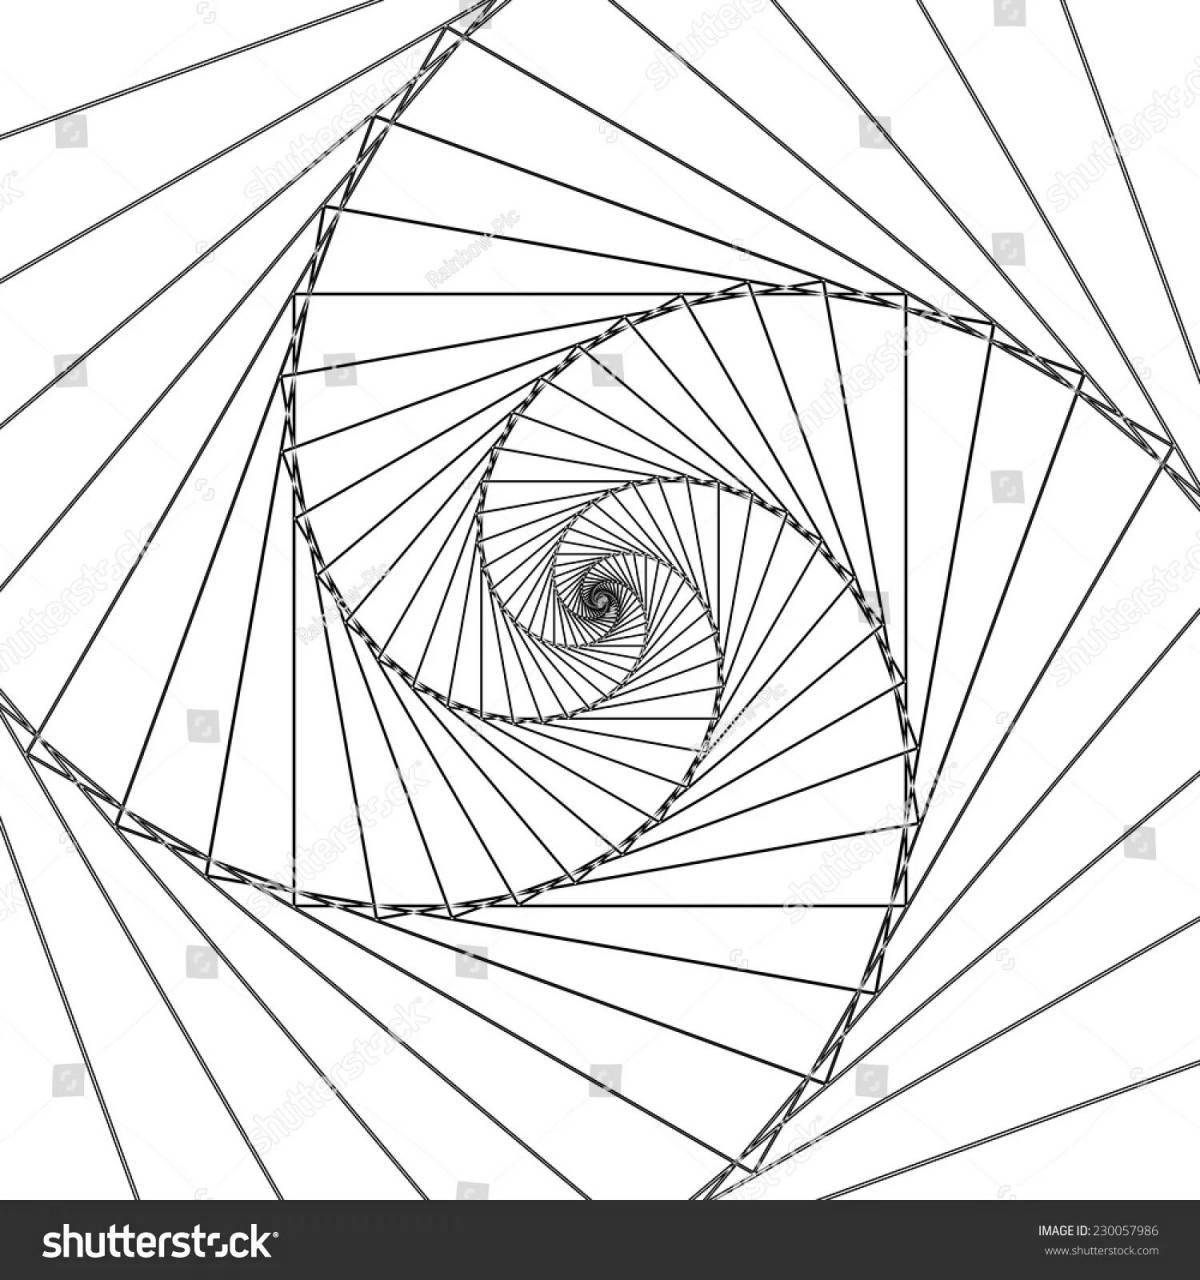 Luminous spiral coloring page